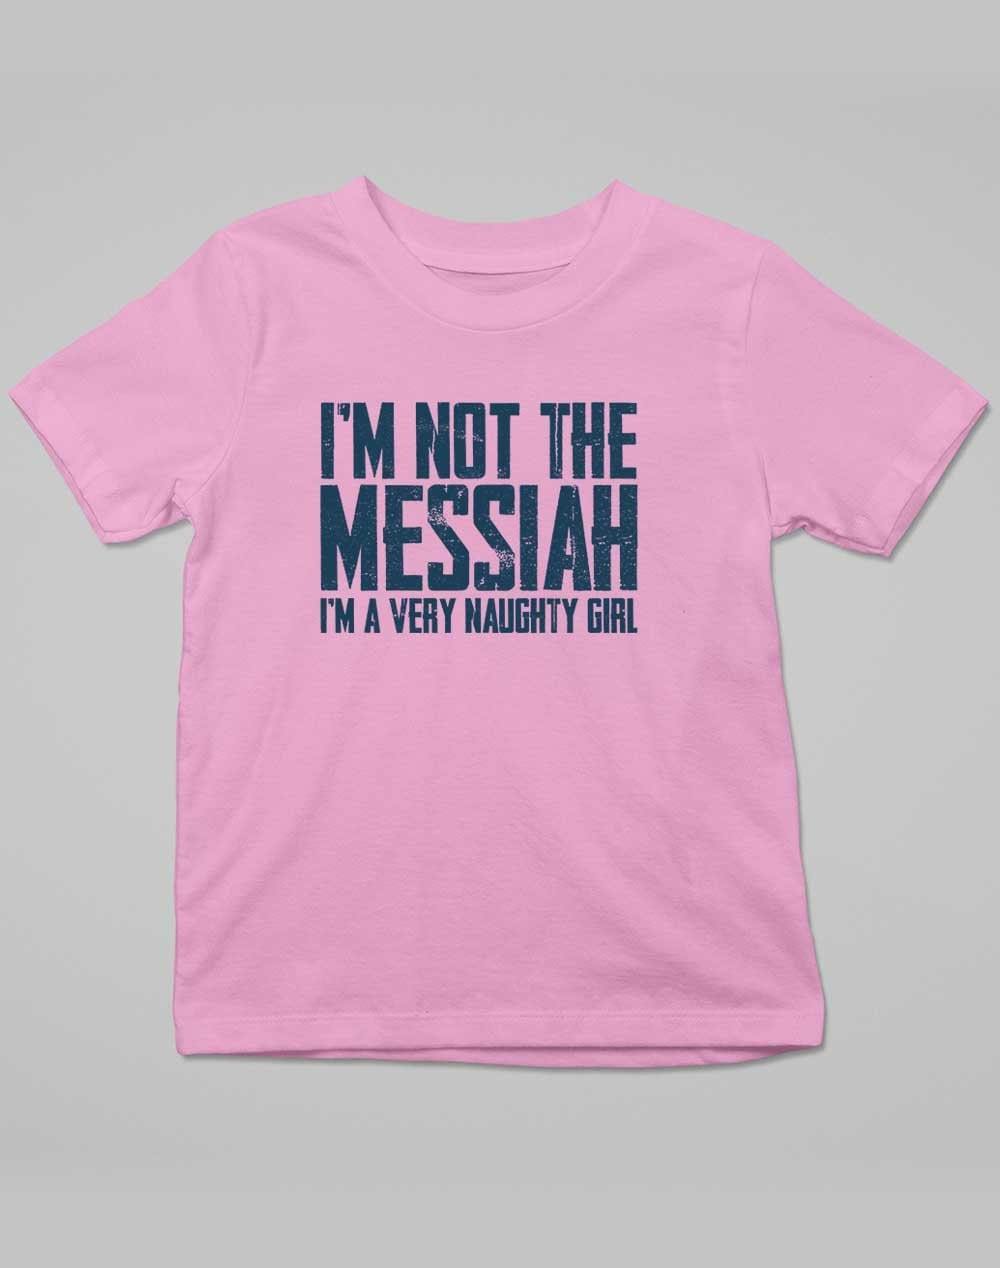 I'm Not the Messiah I'm a Very Naughty Girl Kids T-Shirt 3-4 years / Pale Pink  - Off World Tees